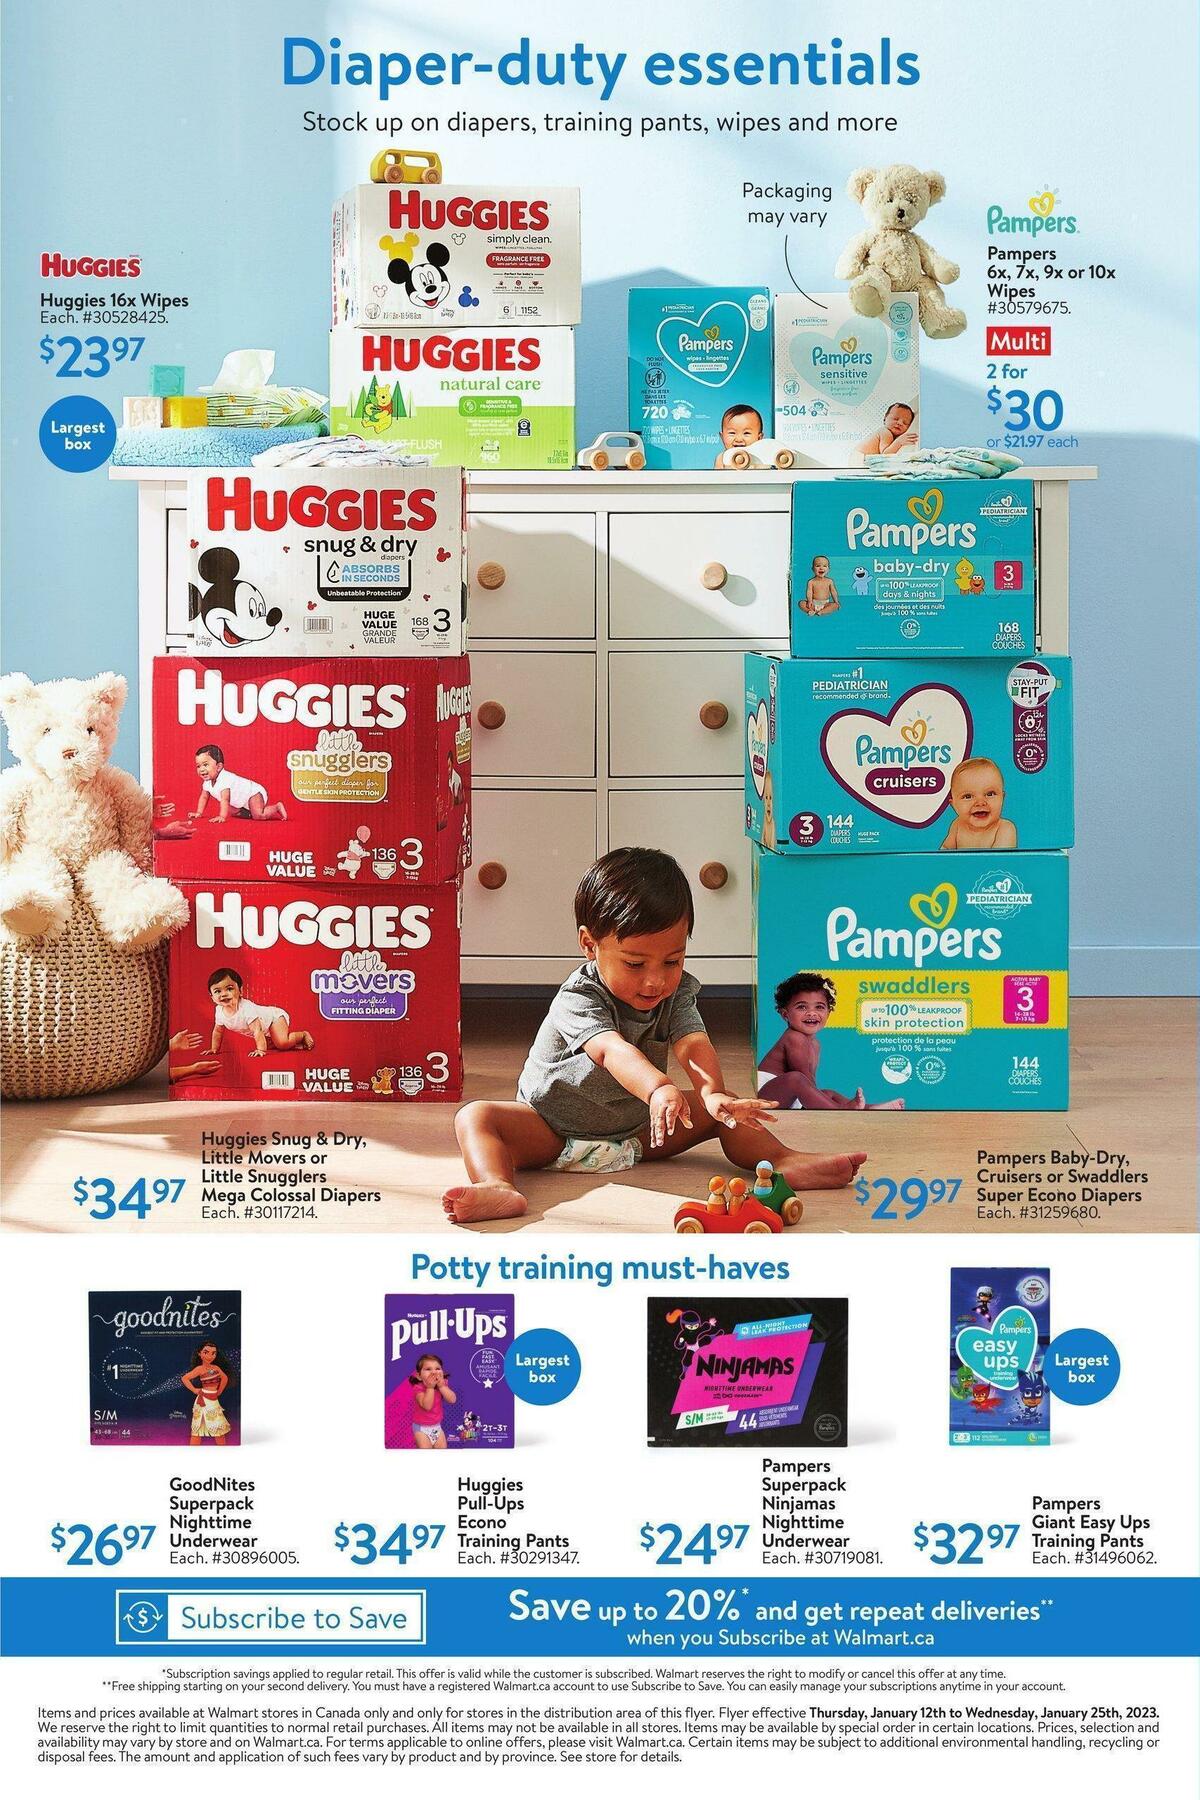 Walmart Everything Baby Flyer from January 12